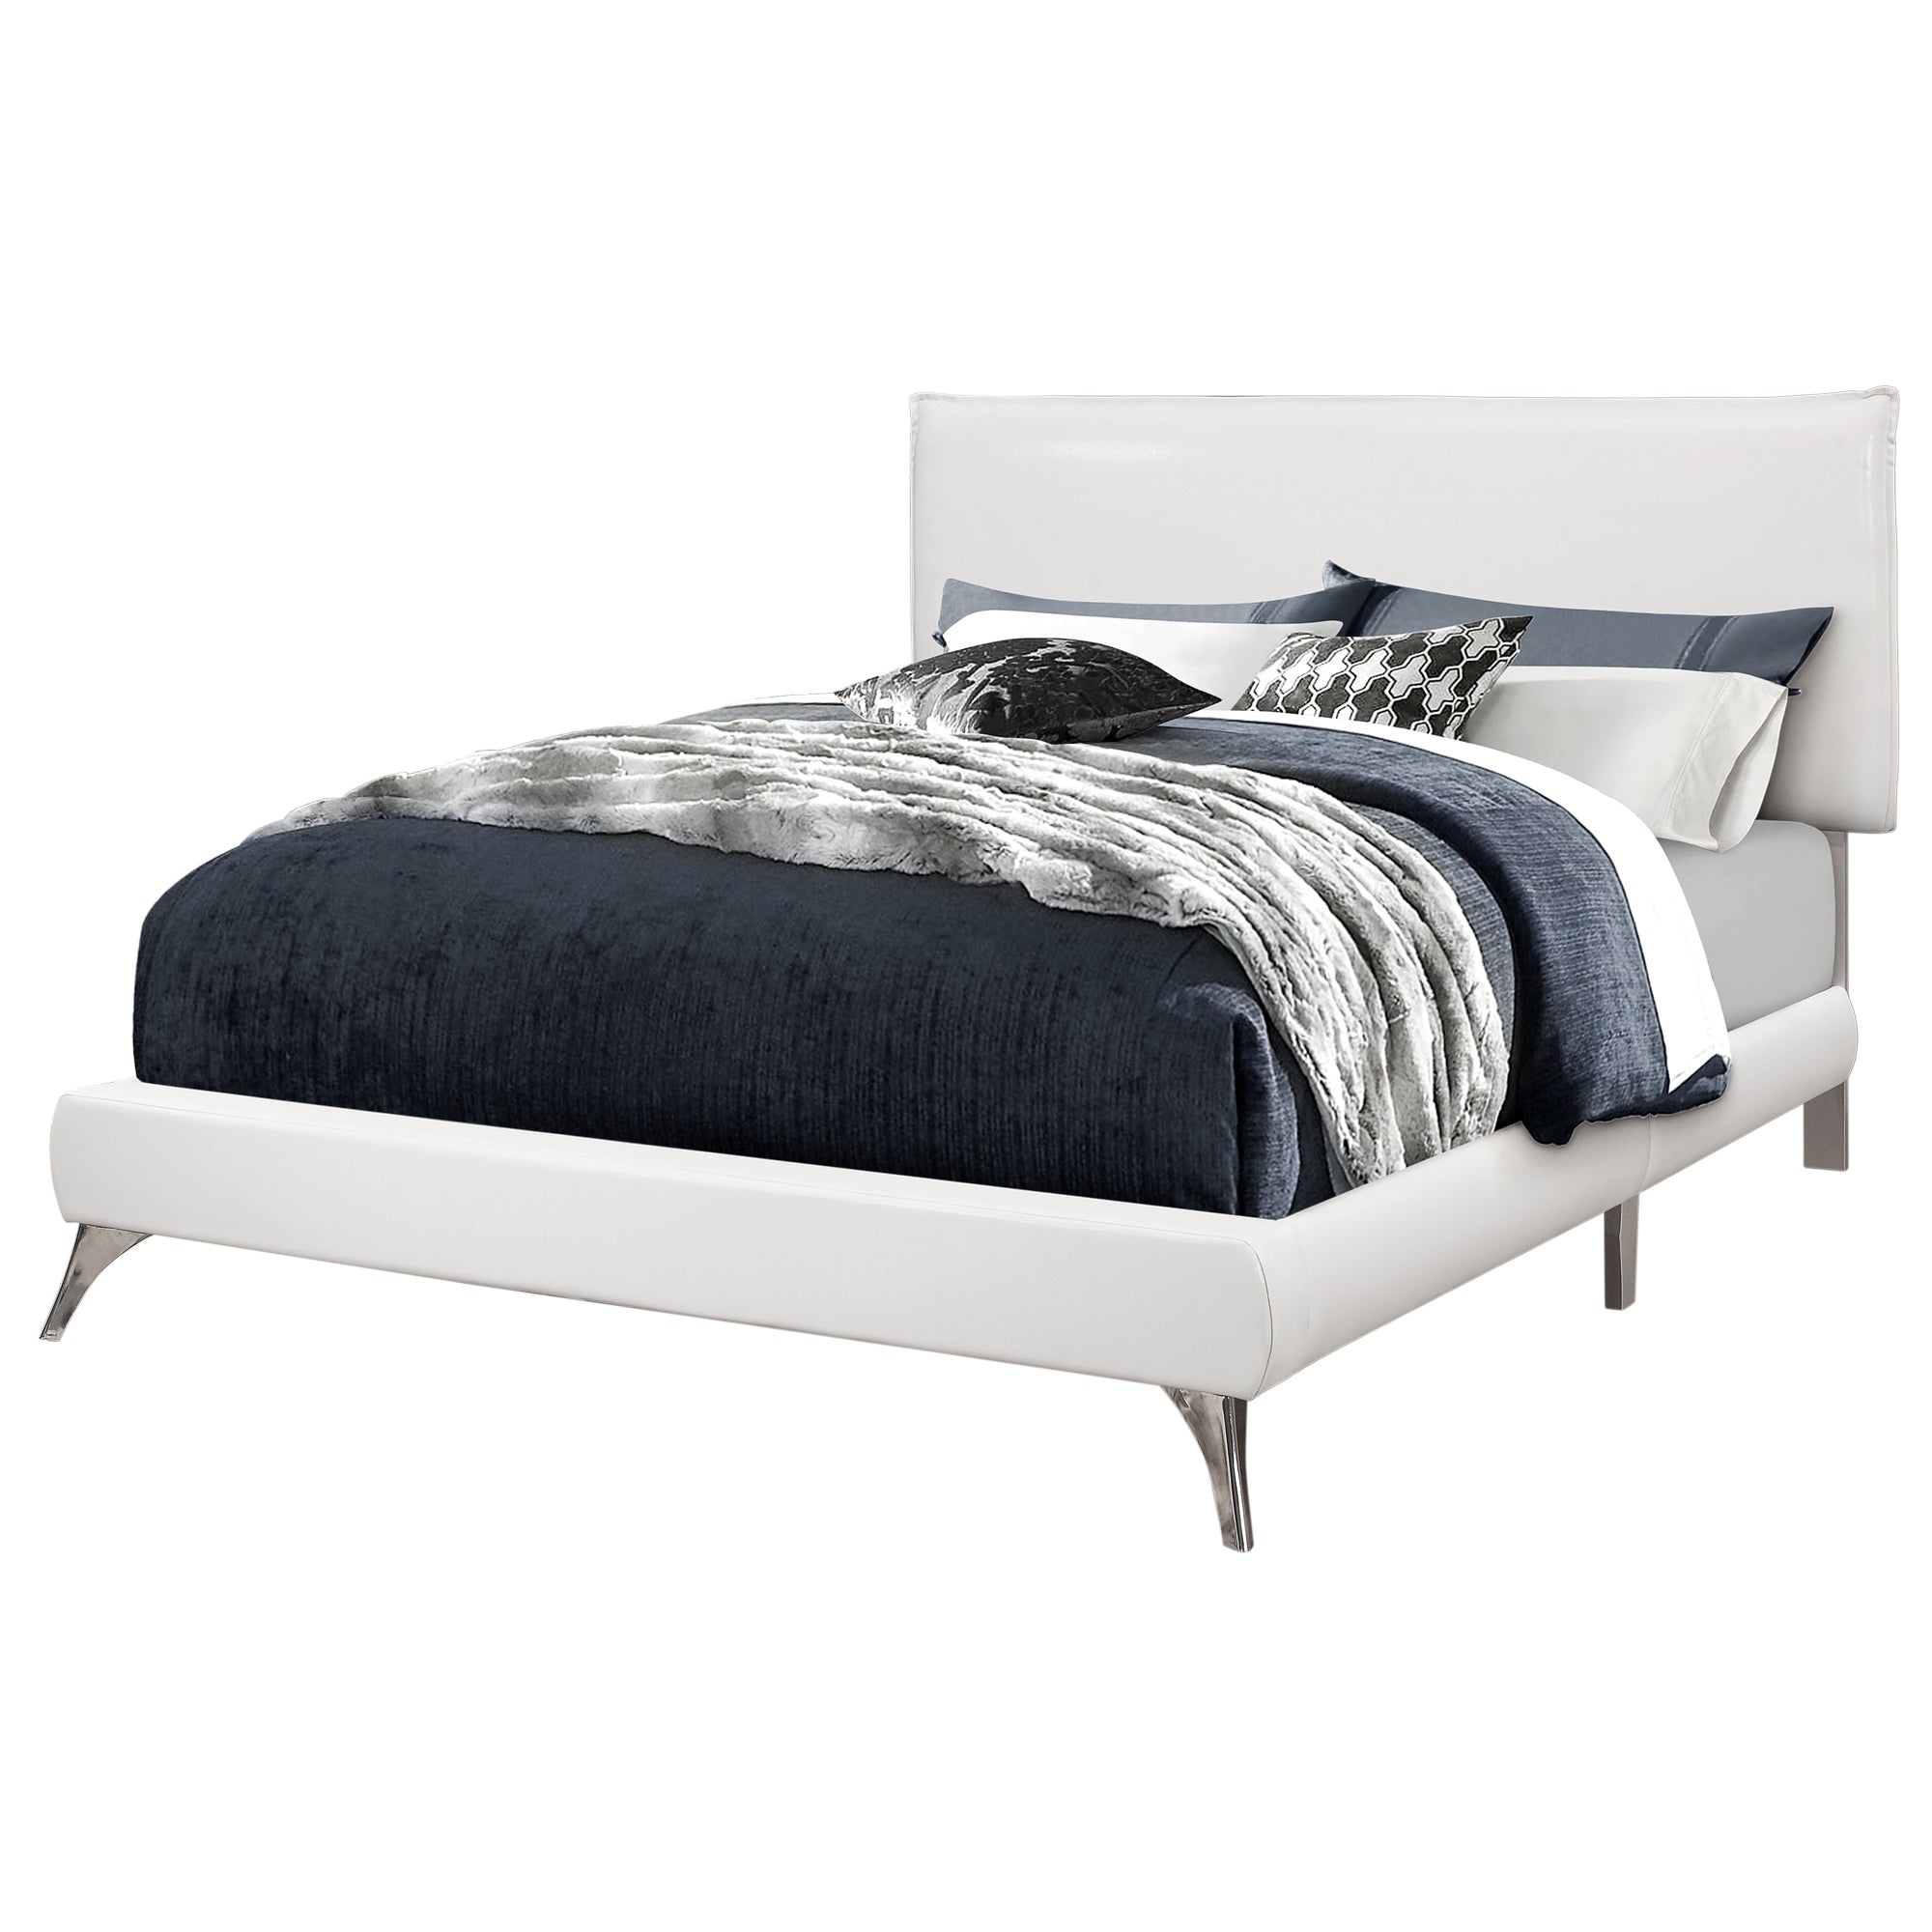 70.25" x 87.25" x 47.25" White Foam Solid Wood Leather Look Queen Size Bed Default Title